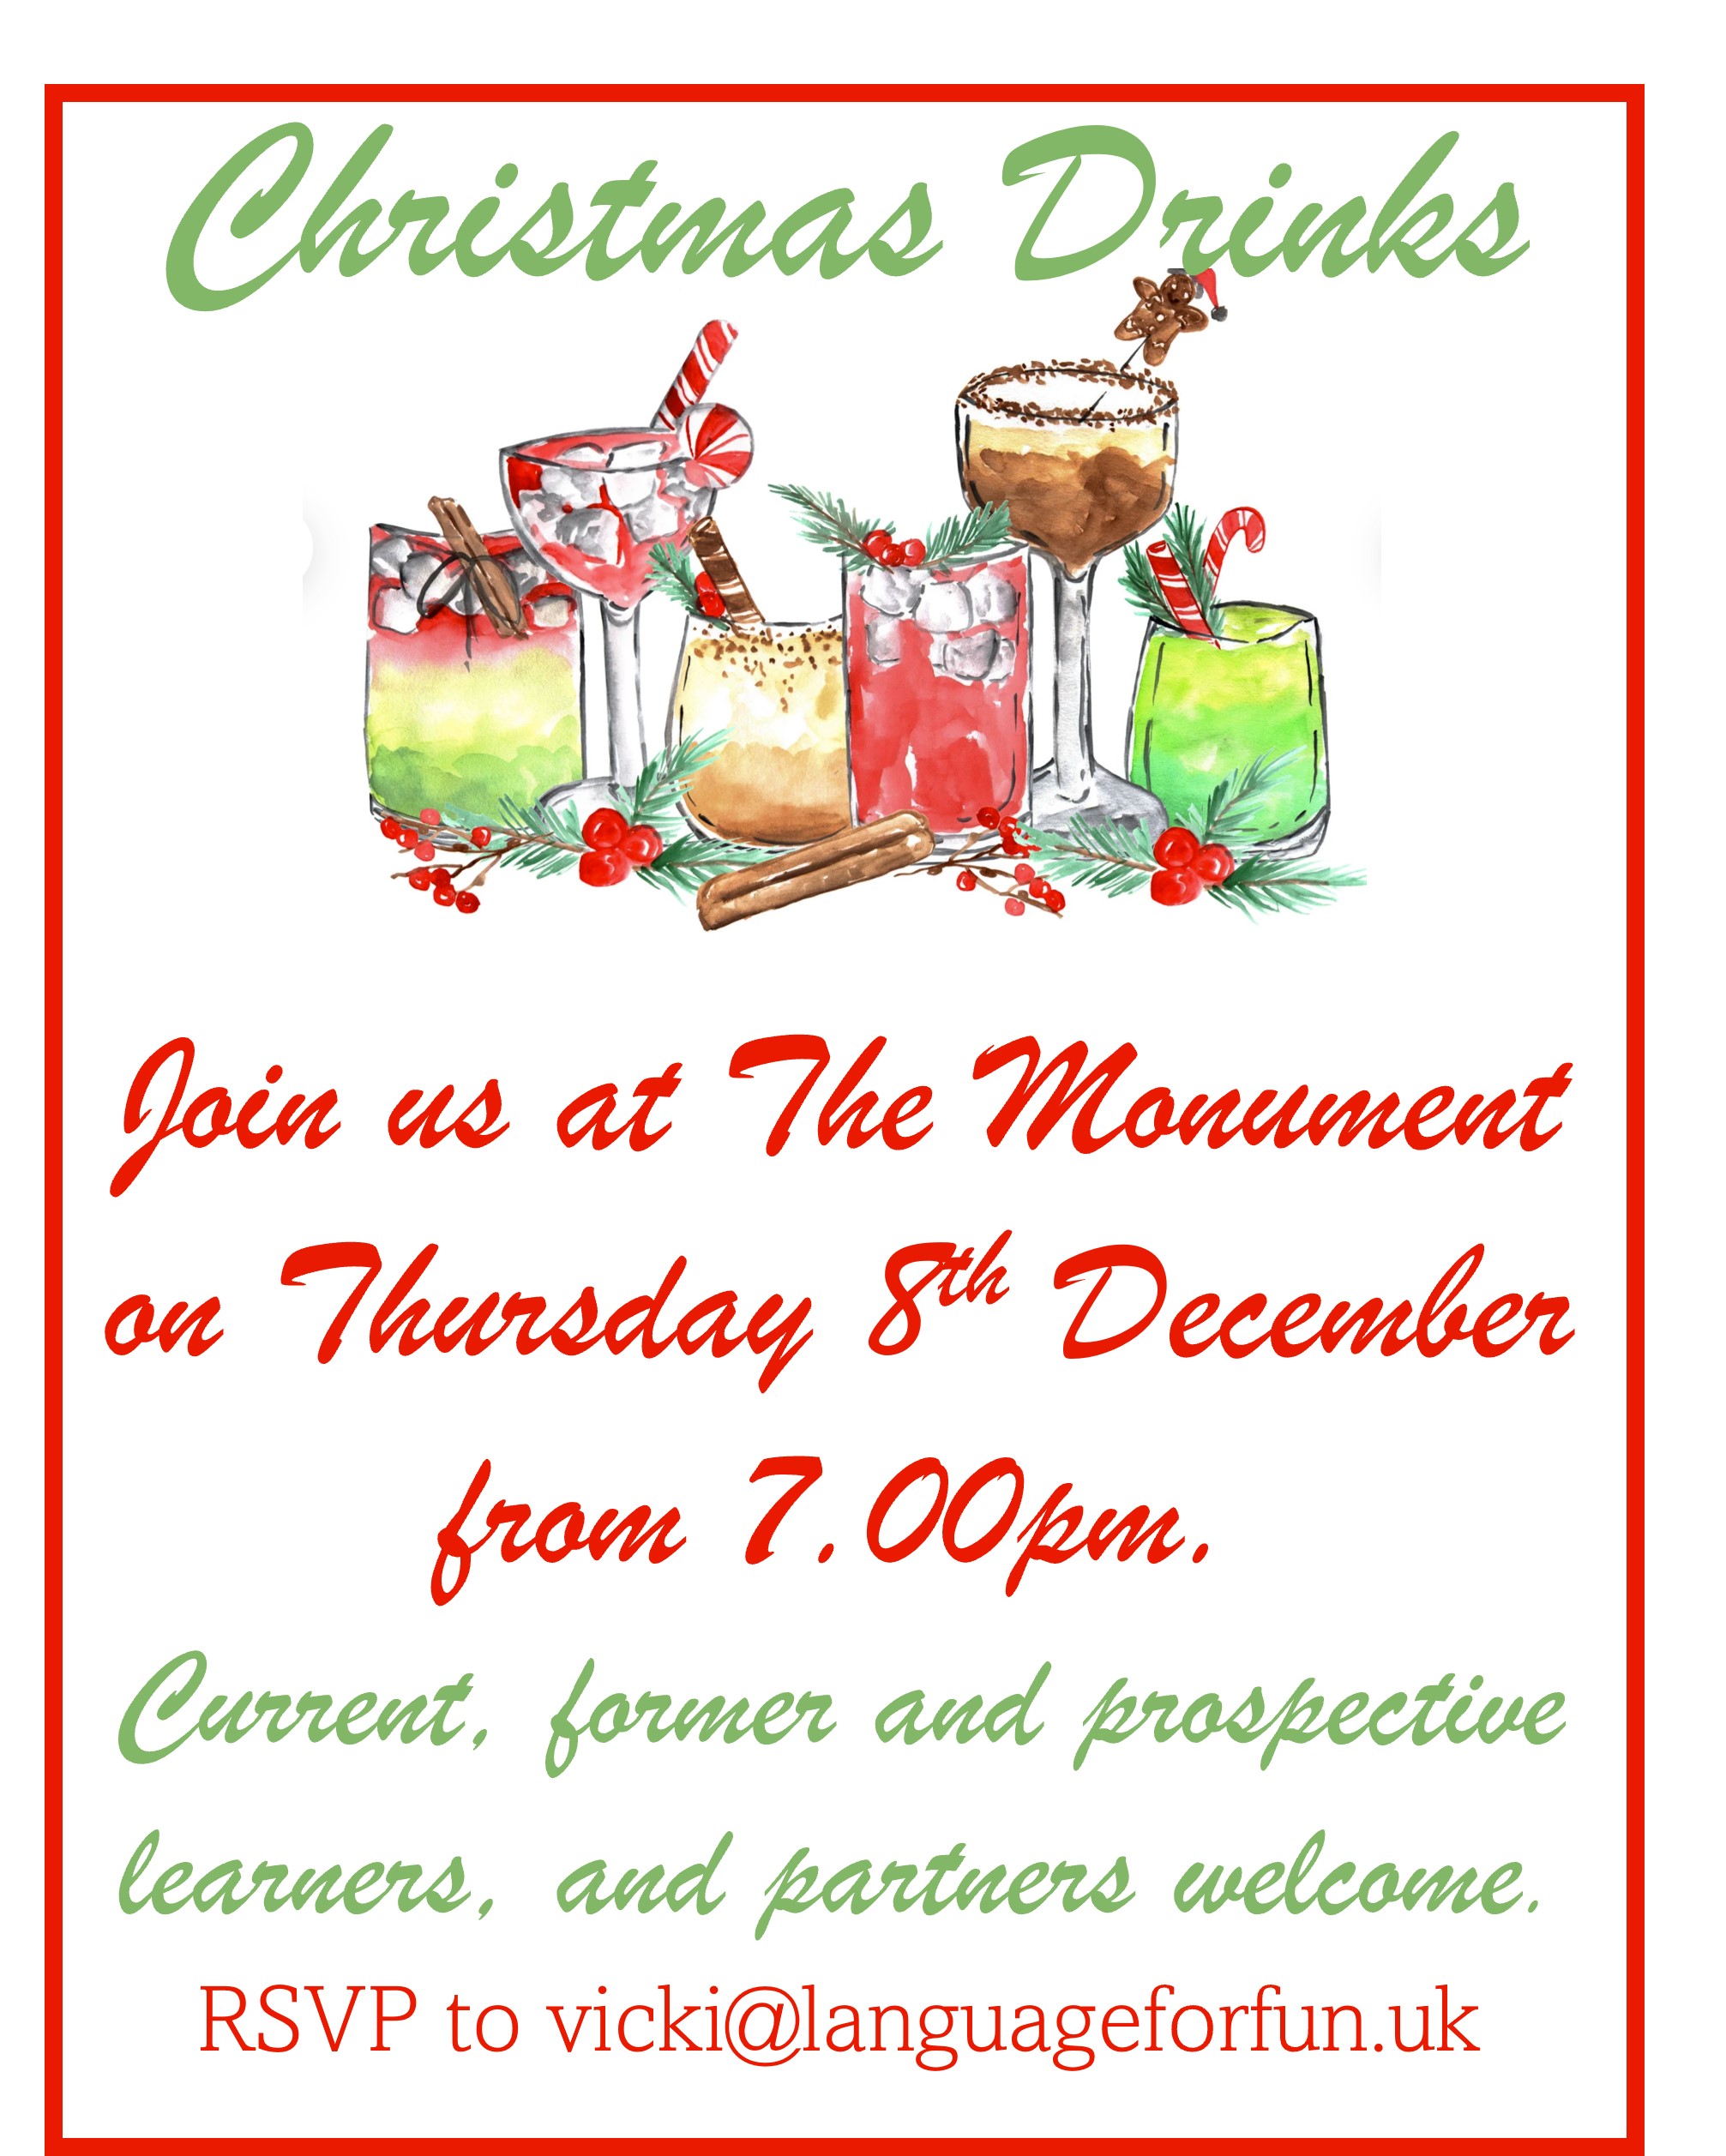 Christmas Social Event at the Monument